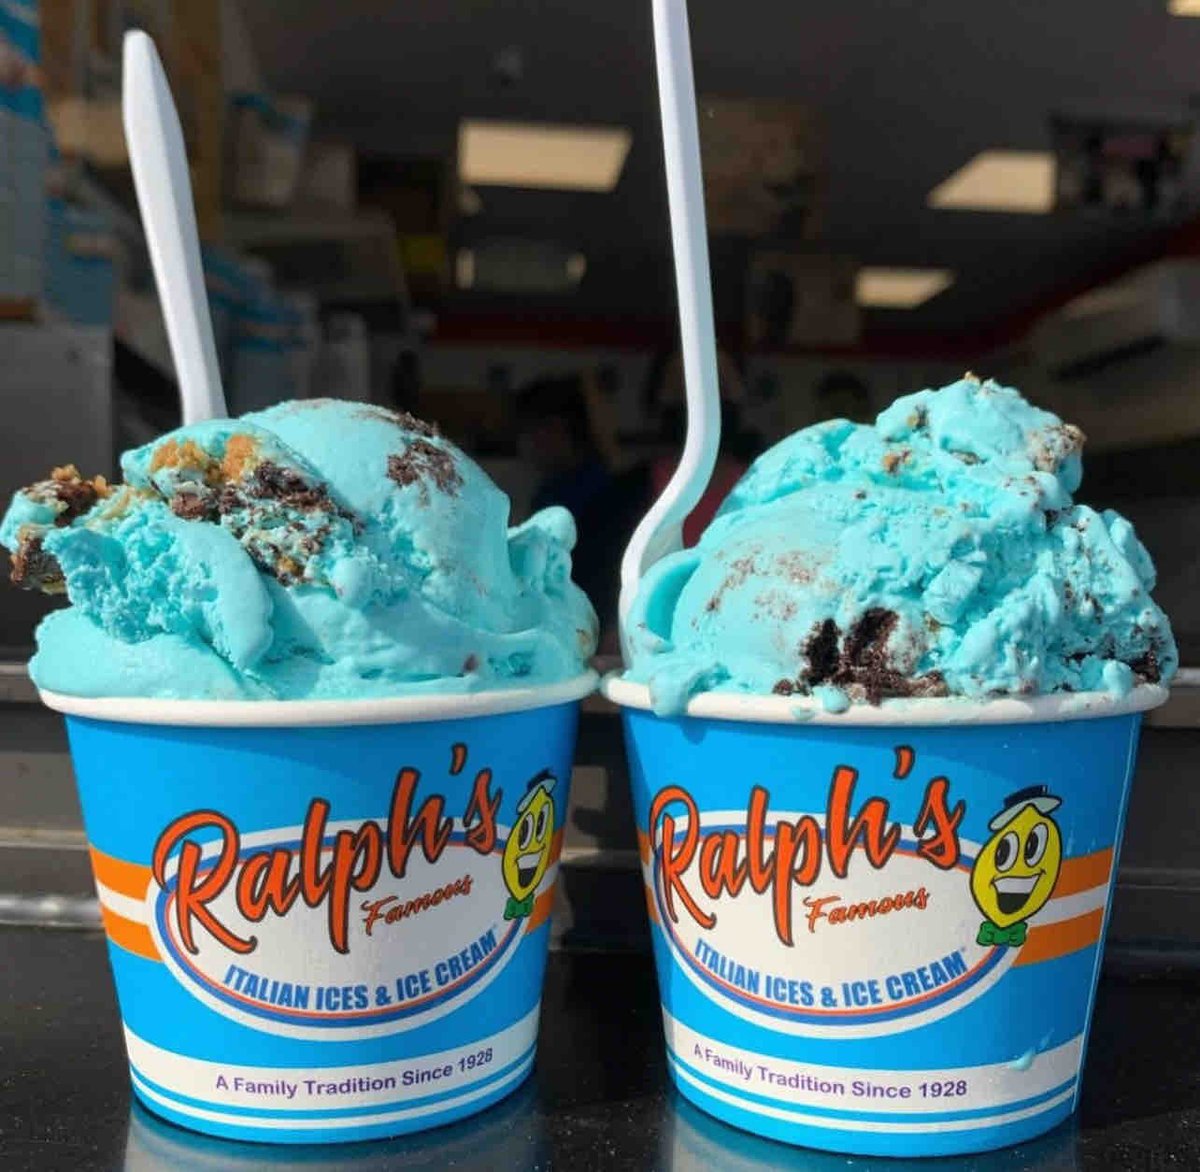 Double the cookie, double the craze! 🤪 
@ralphs_valleystream
.
.
.
#ralphsfamous #ralphsfamousitalianices #ralphsforlife #ralphsseason #ralphs #cookiecraze #fanfavorite #foodielife